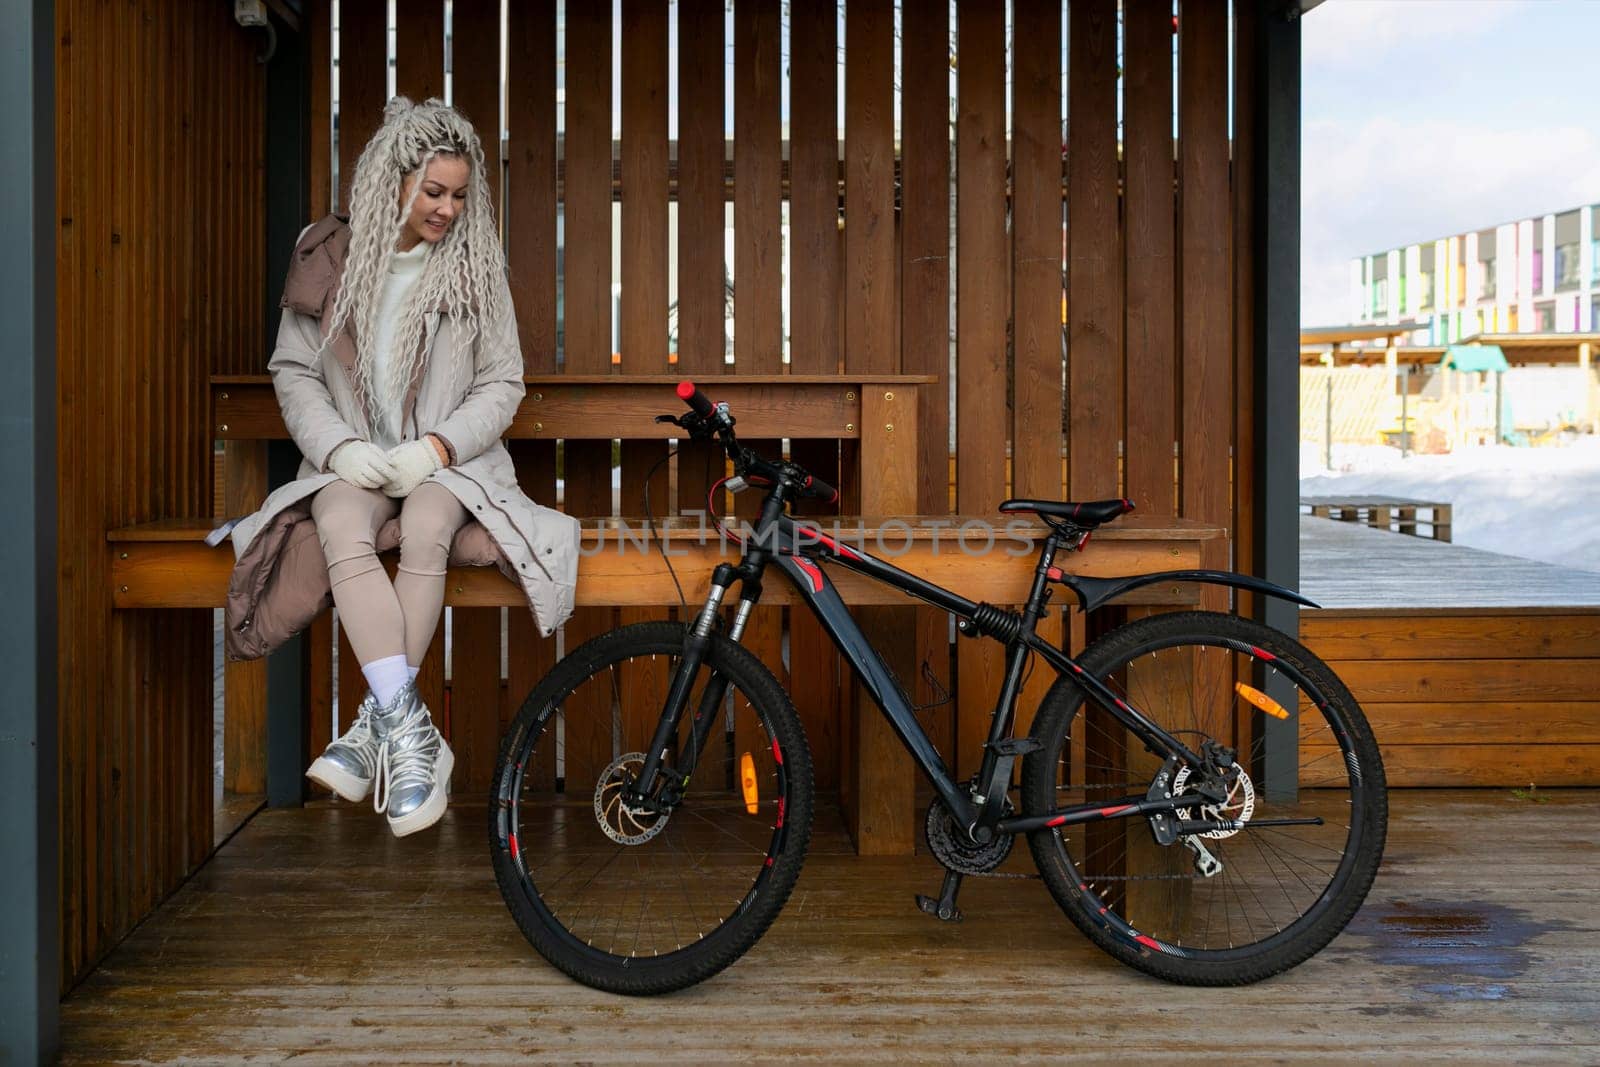 A woman is seated on a bench located next to a bicycle. She appears to be taking a break and enjoying a moment of rest. The bike is parked beside her, adding a touch of urban scenery to the setting.